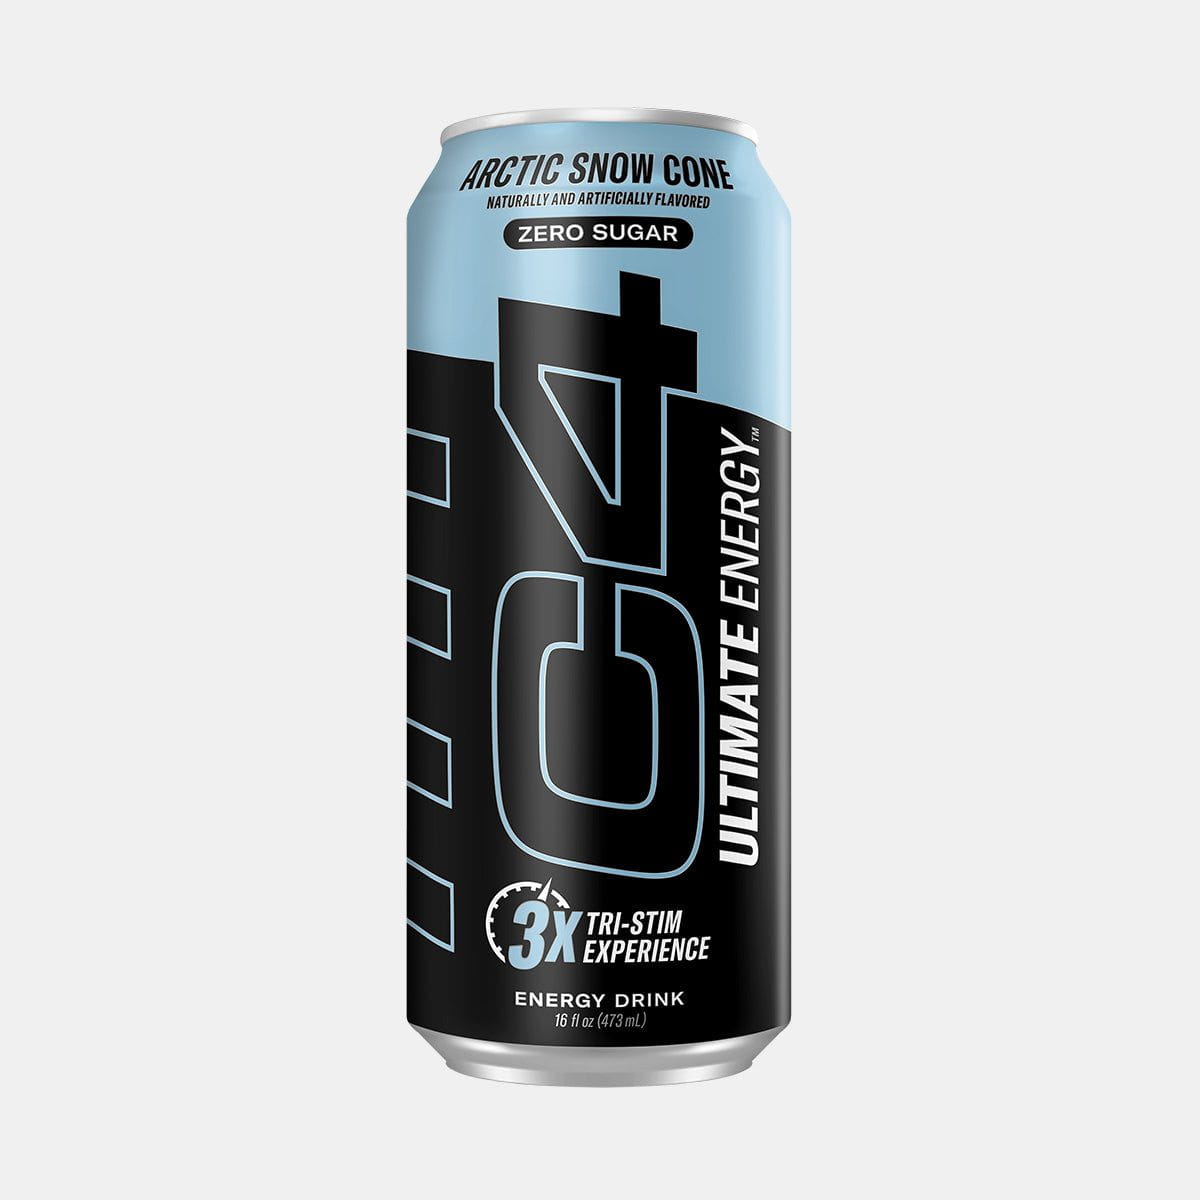 C4 Ultimate Energy™ Carbonated View 2